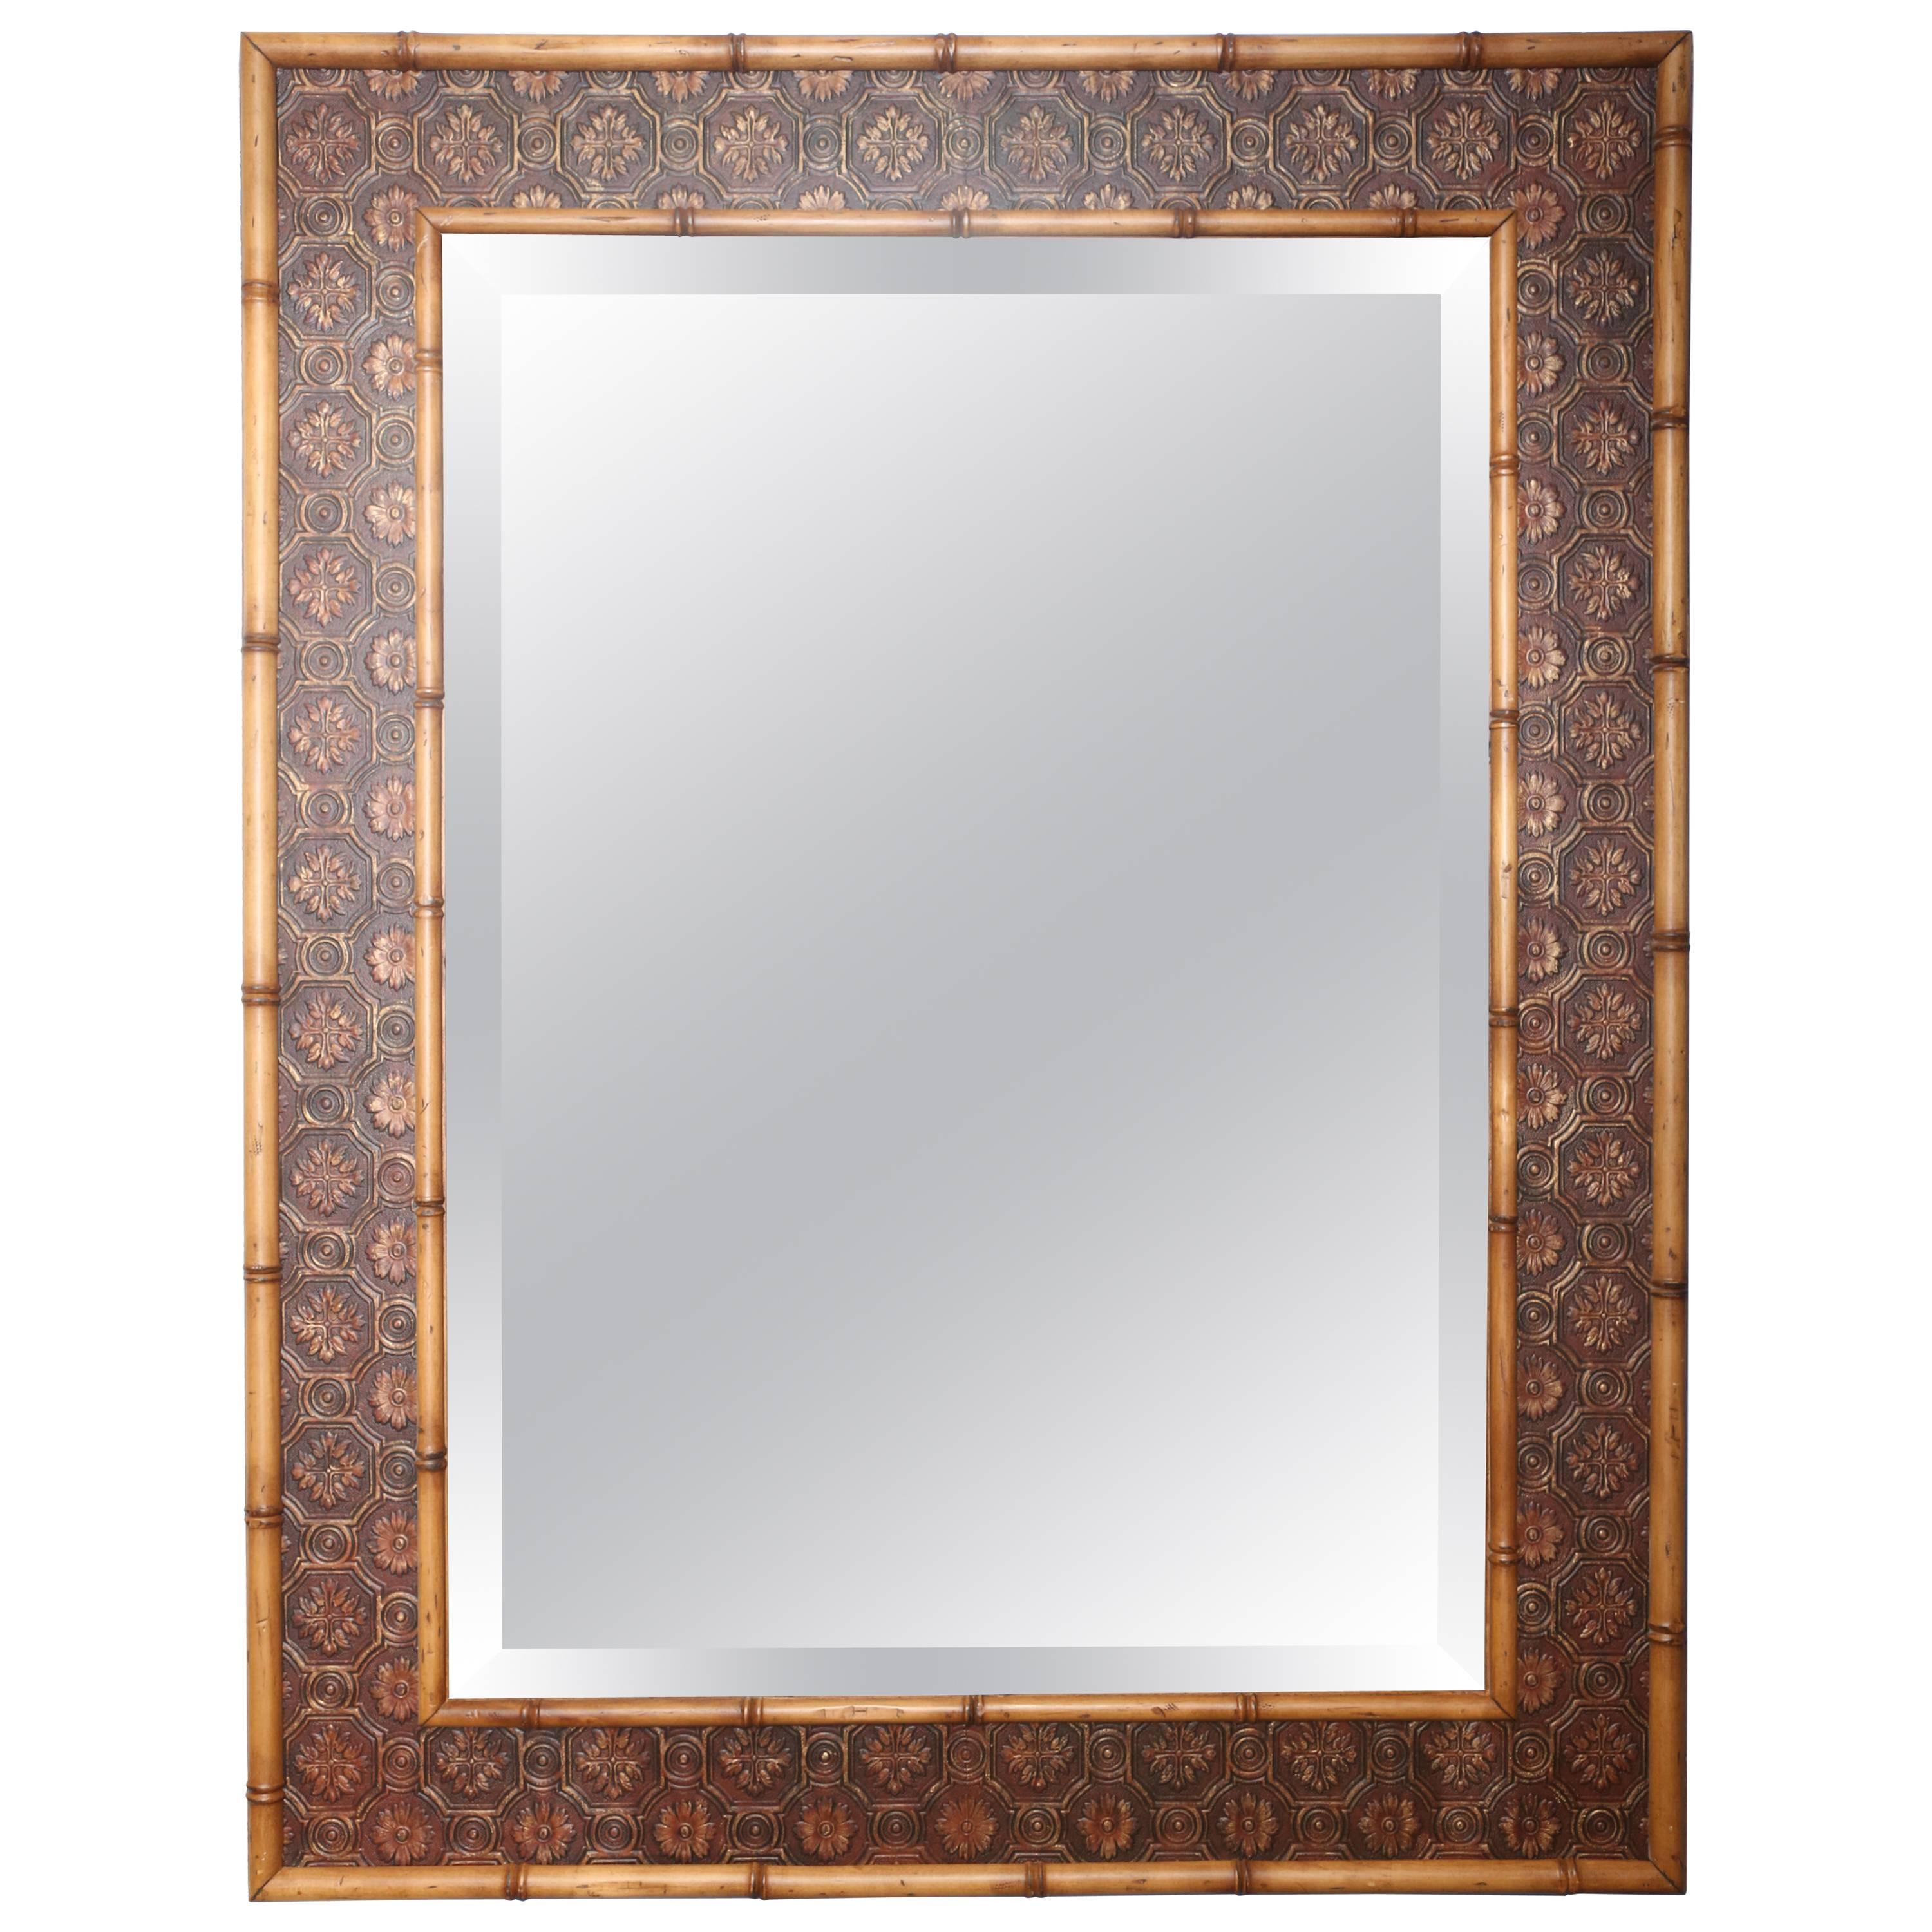 Large Faux Bamboo Bevel Mirror